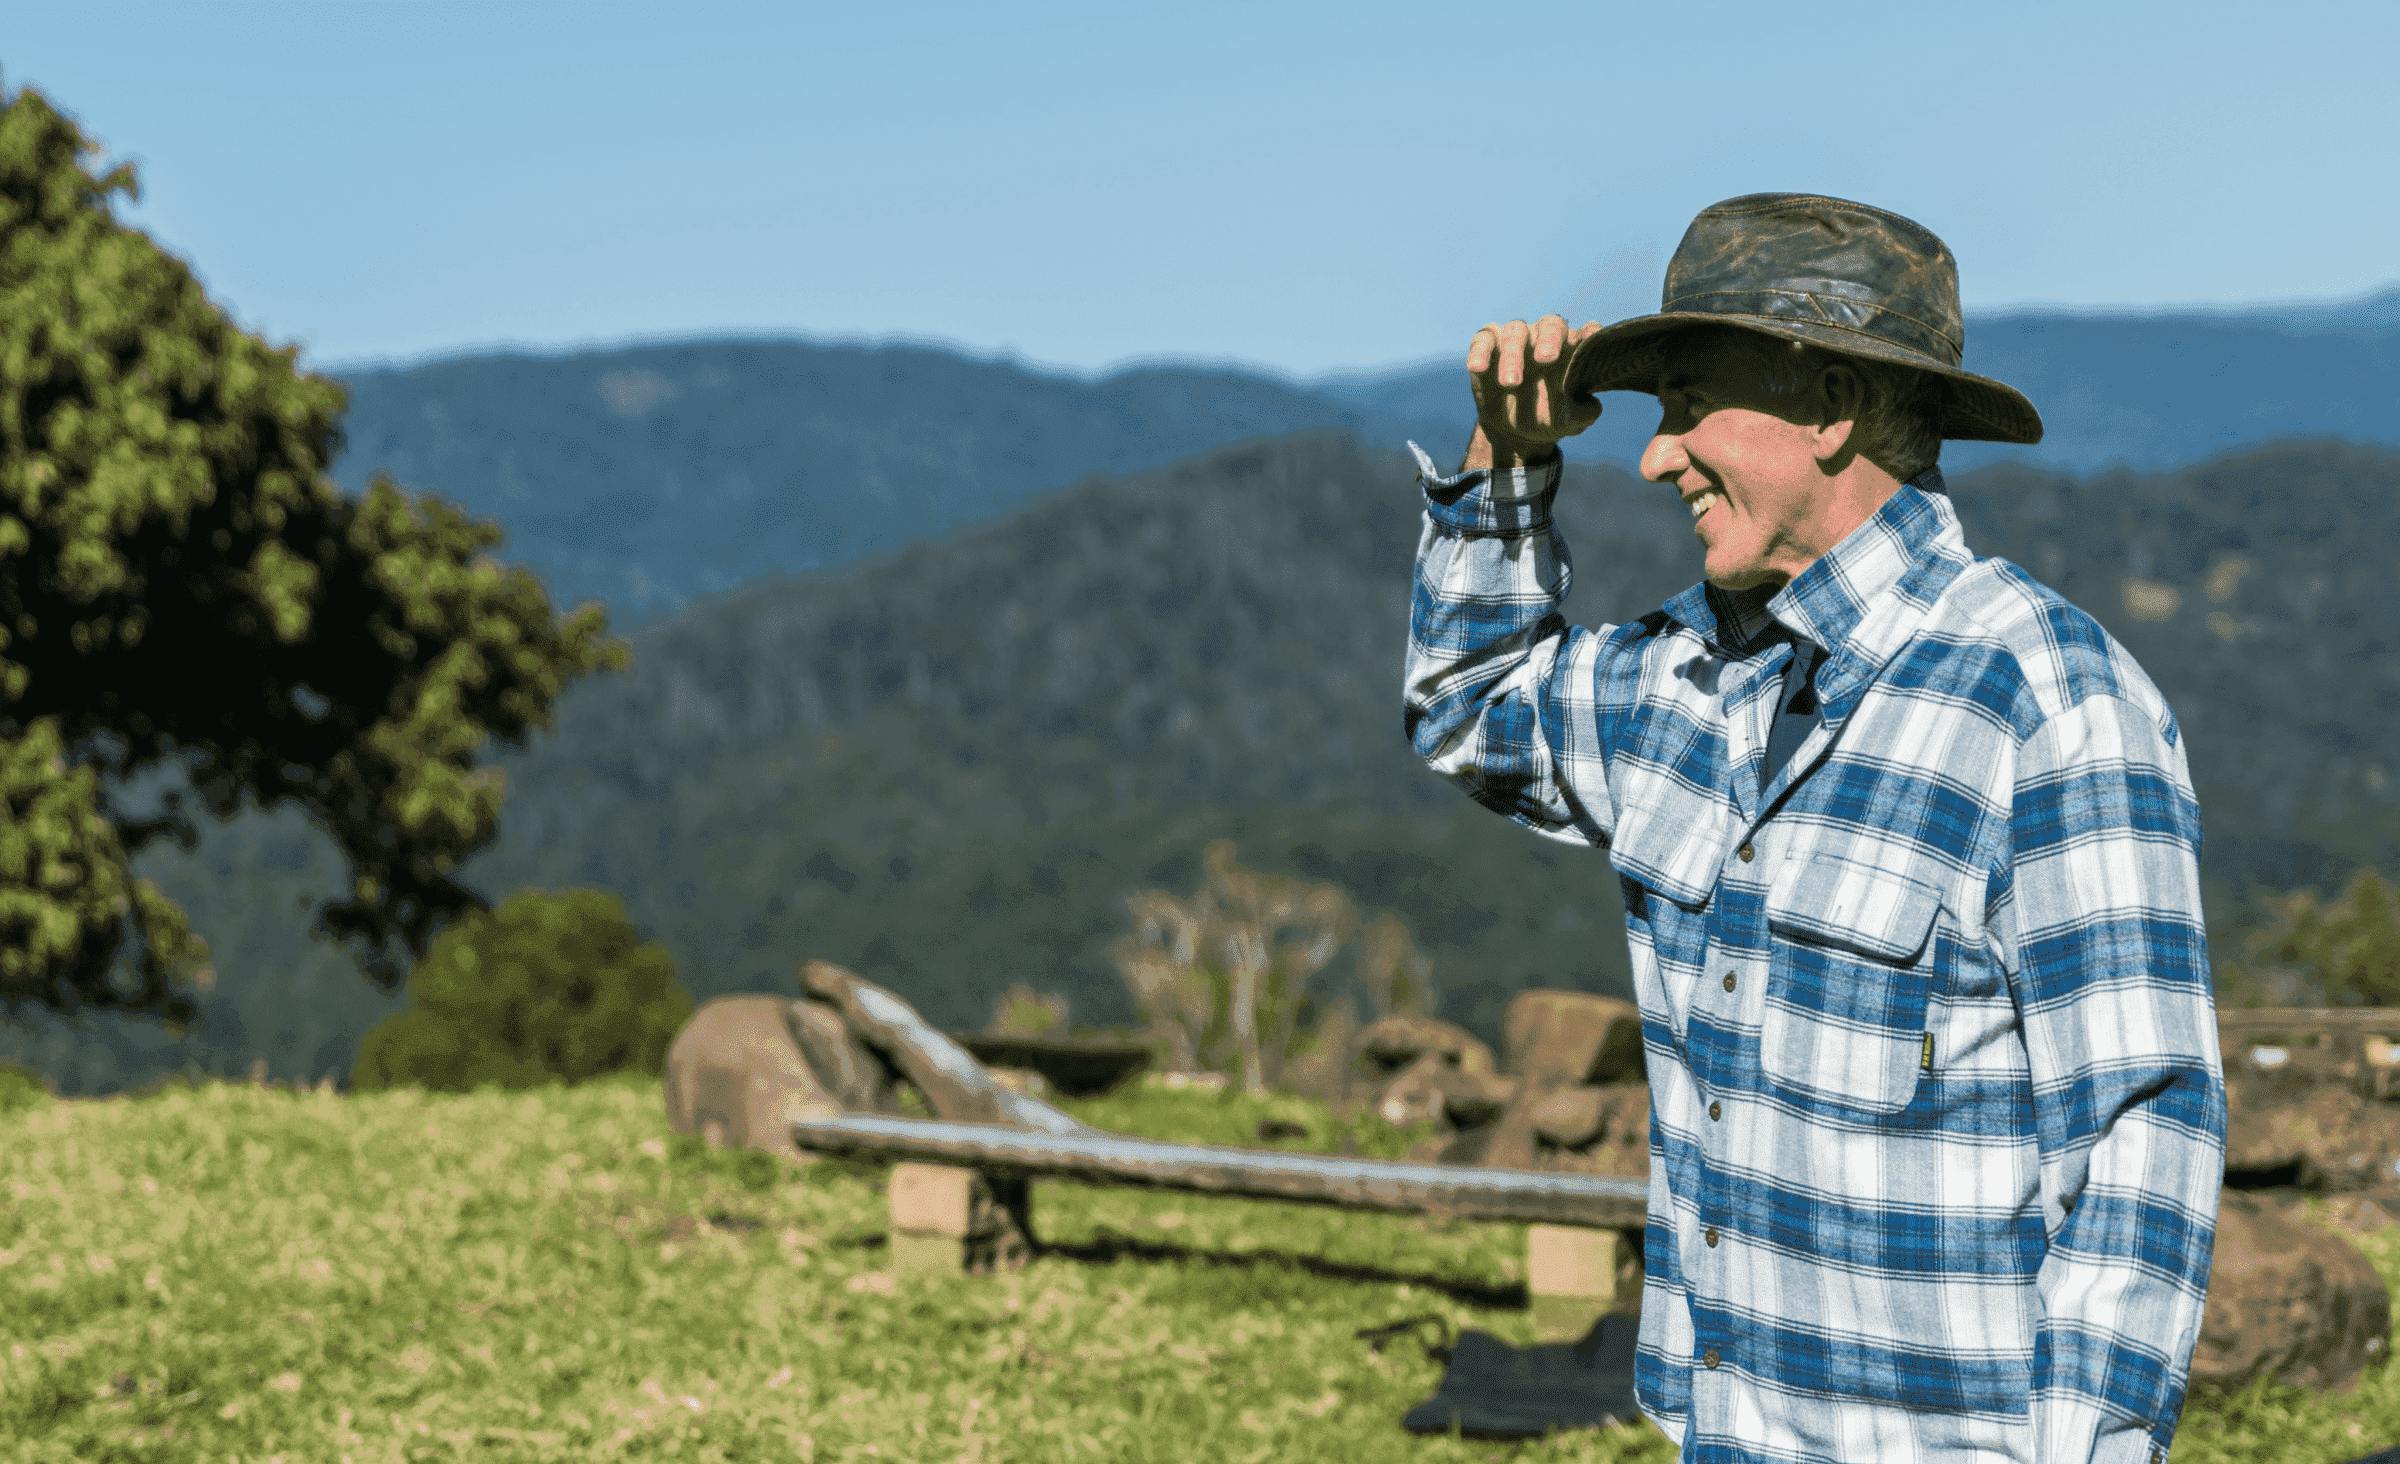 A photo of a smiling farmer in a hat and a plaid shirt in front of the green hills illustrating the purpose of the Noah mobile app for purchasing products directly from farmers